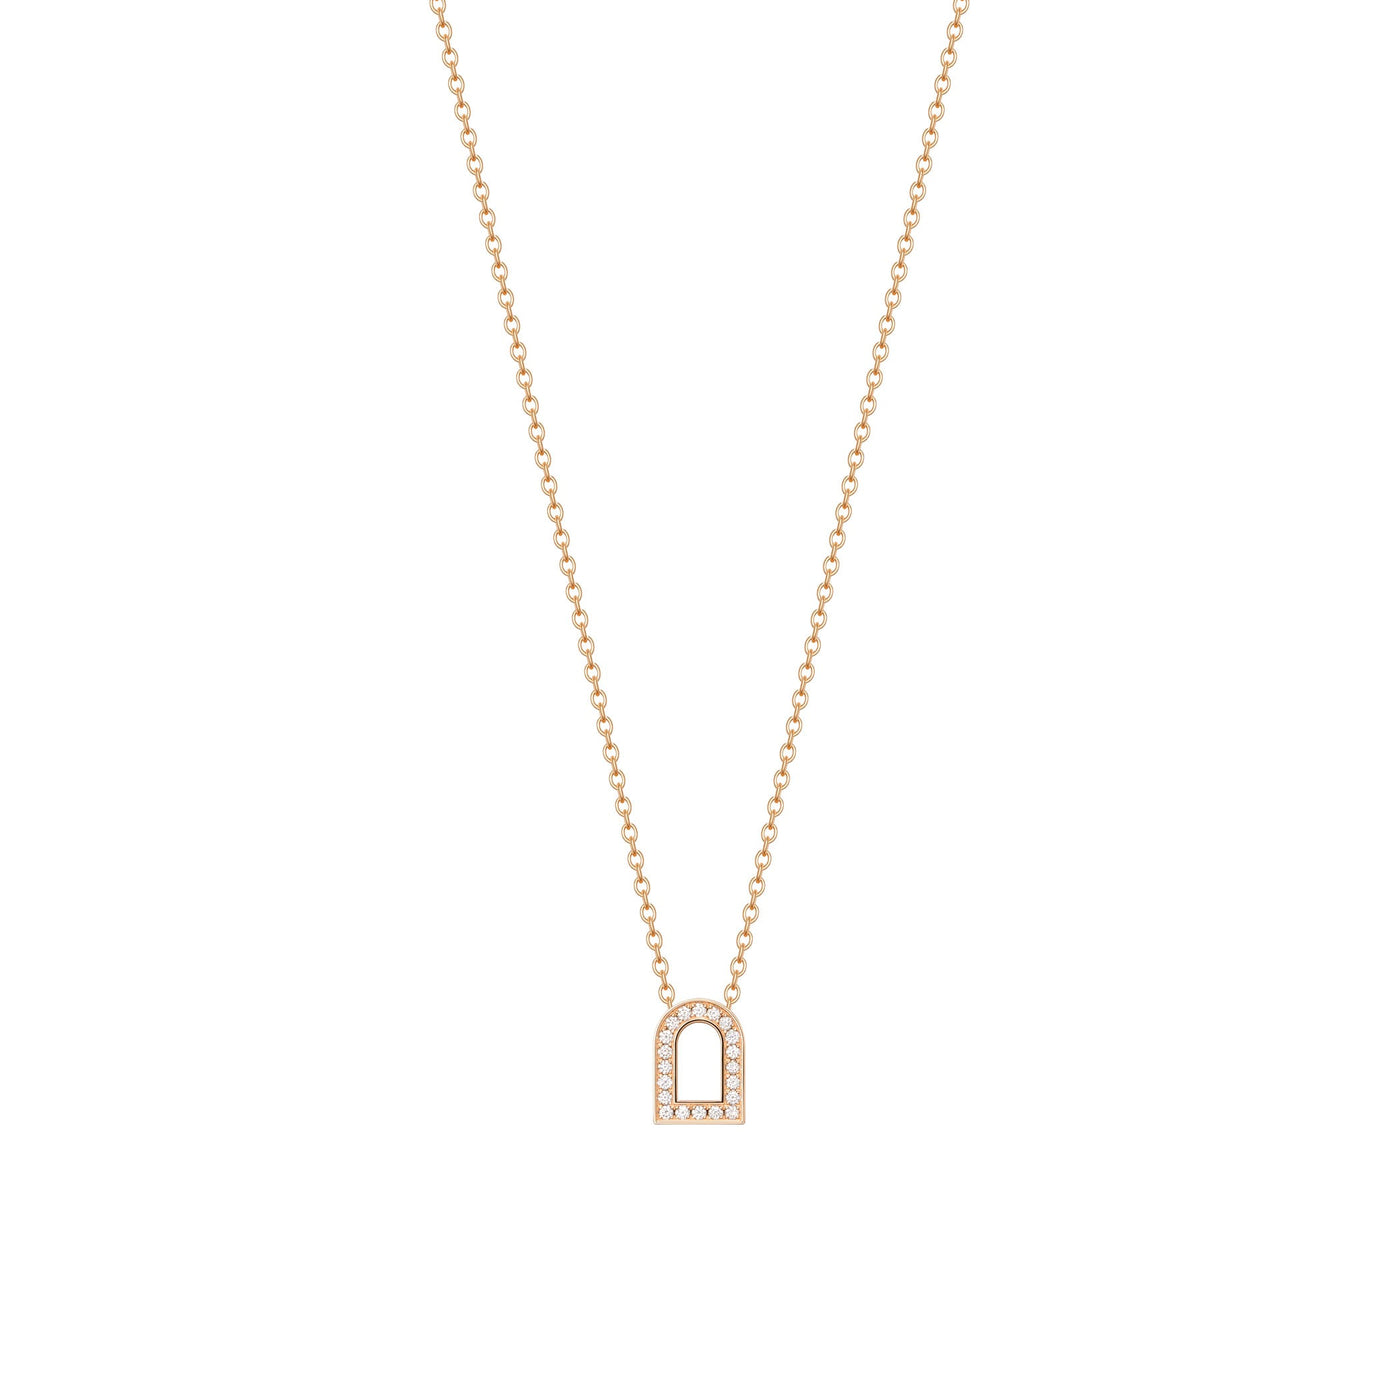 L'Arc Voyage Charm PM Chain Necklace, 18k Rose Gold with Galerie Diamonds - DAVIDOR